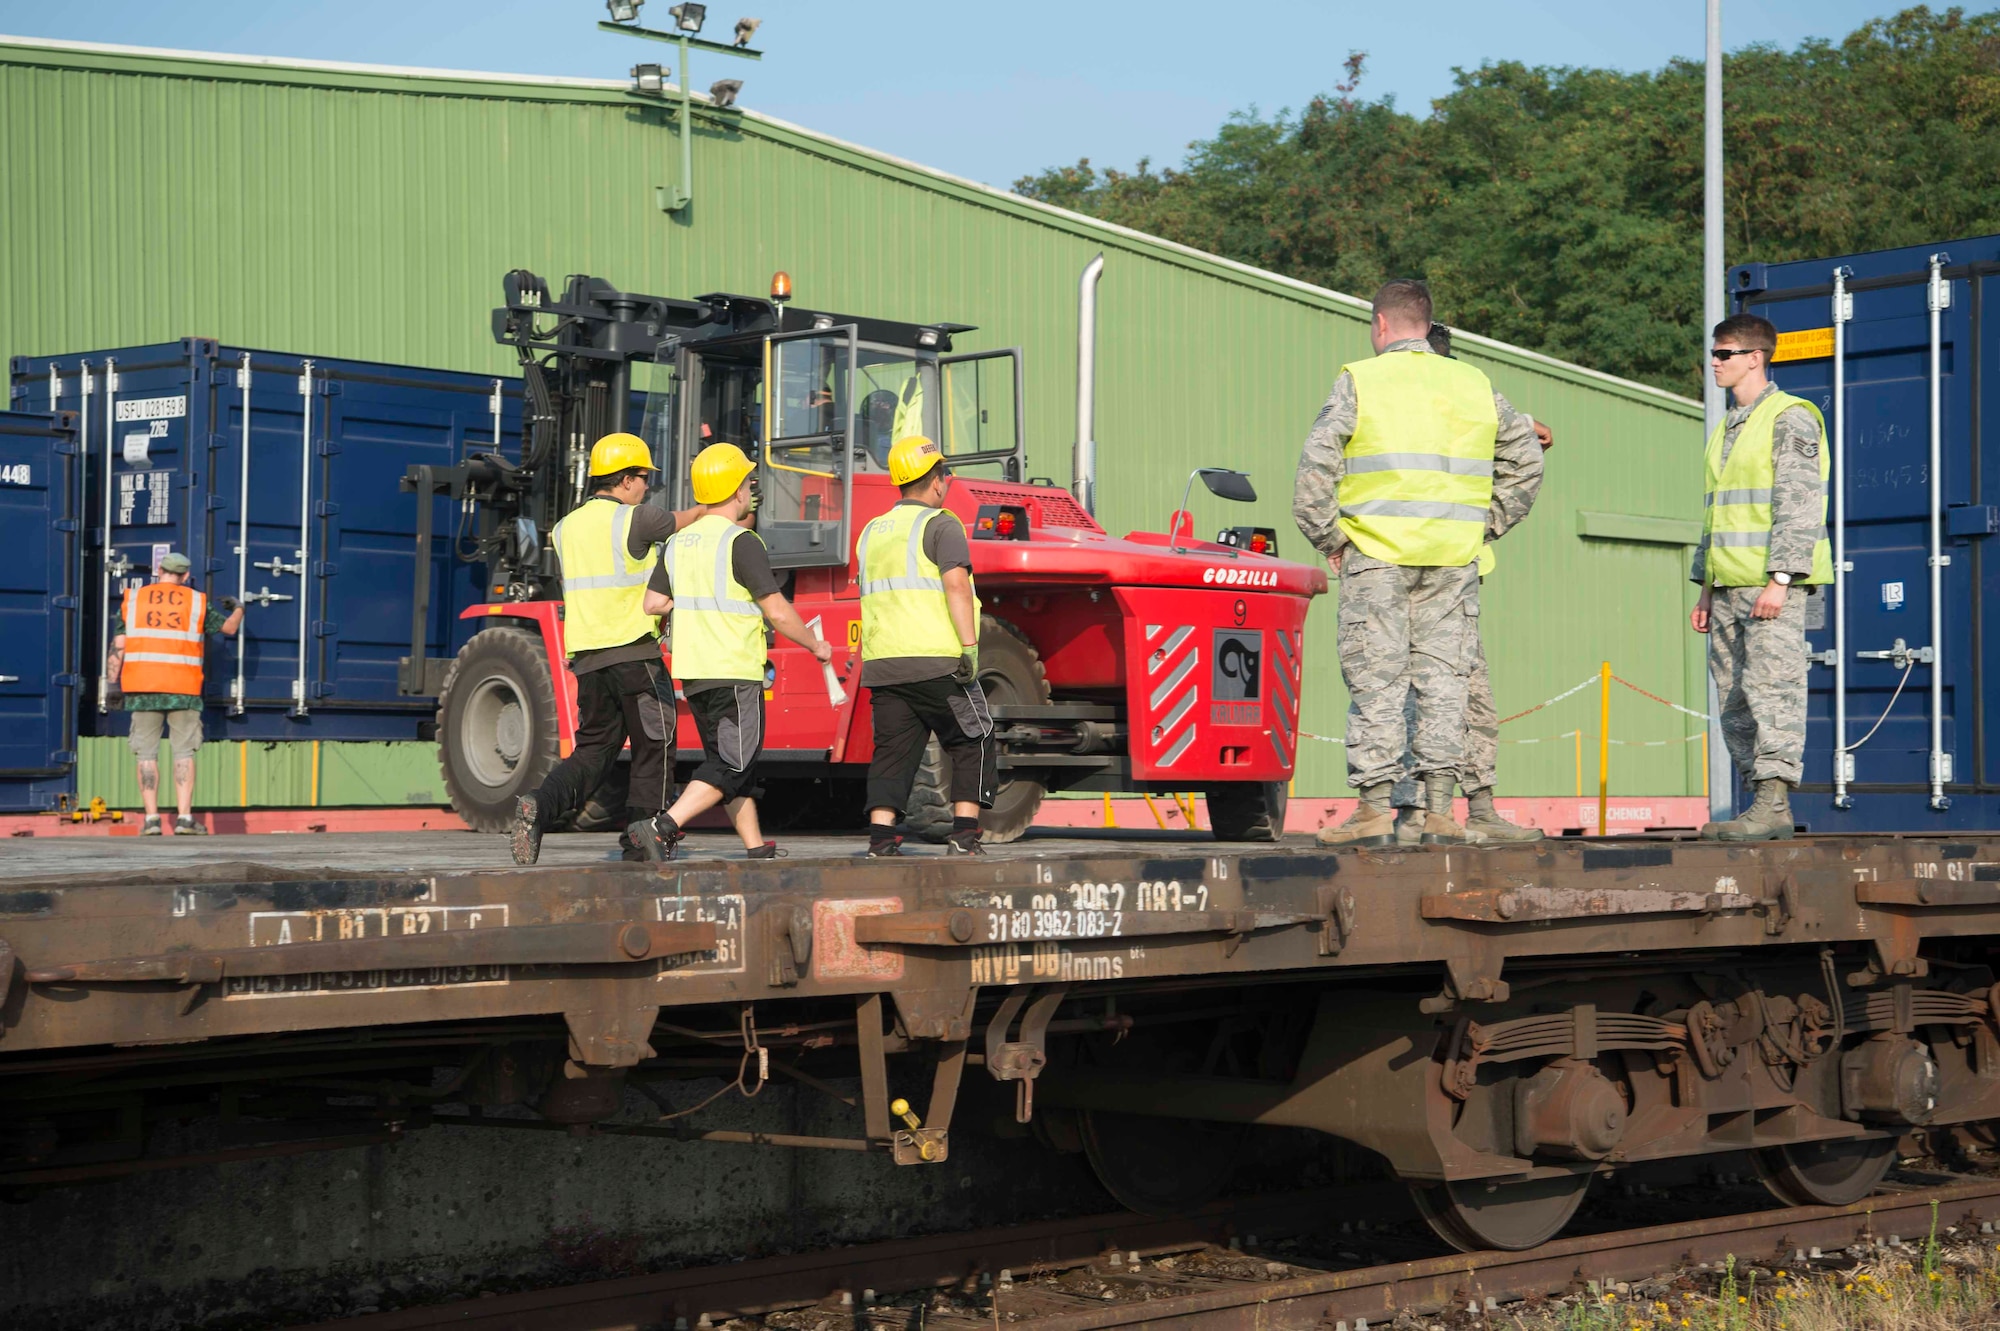 U.S. Air Force Airmen oversee Warehouse Service Agency personnel load cargo onto a train car in Sanem, Luxembourg, July 23, 2018. The loading was part of a deployment exercise in which a variety of vehicles and equipment travelled via train to Krzesiny Air Base, Poland. WSA stores and maintains the assigned 86th Material Maintenance Squadron's equipment and ensures that it is ready to rapidly deploy when needed. (U.S. Air Force photo by Senior Airman Elizabeth Baker)